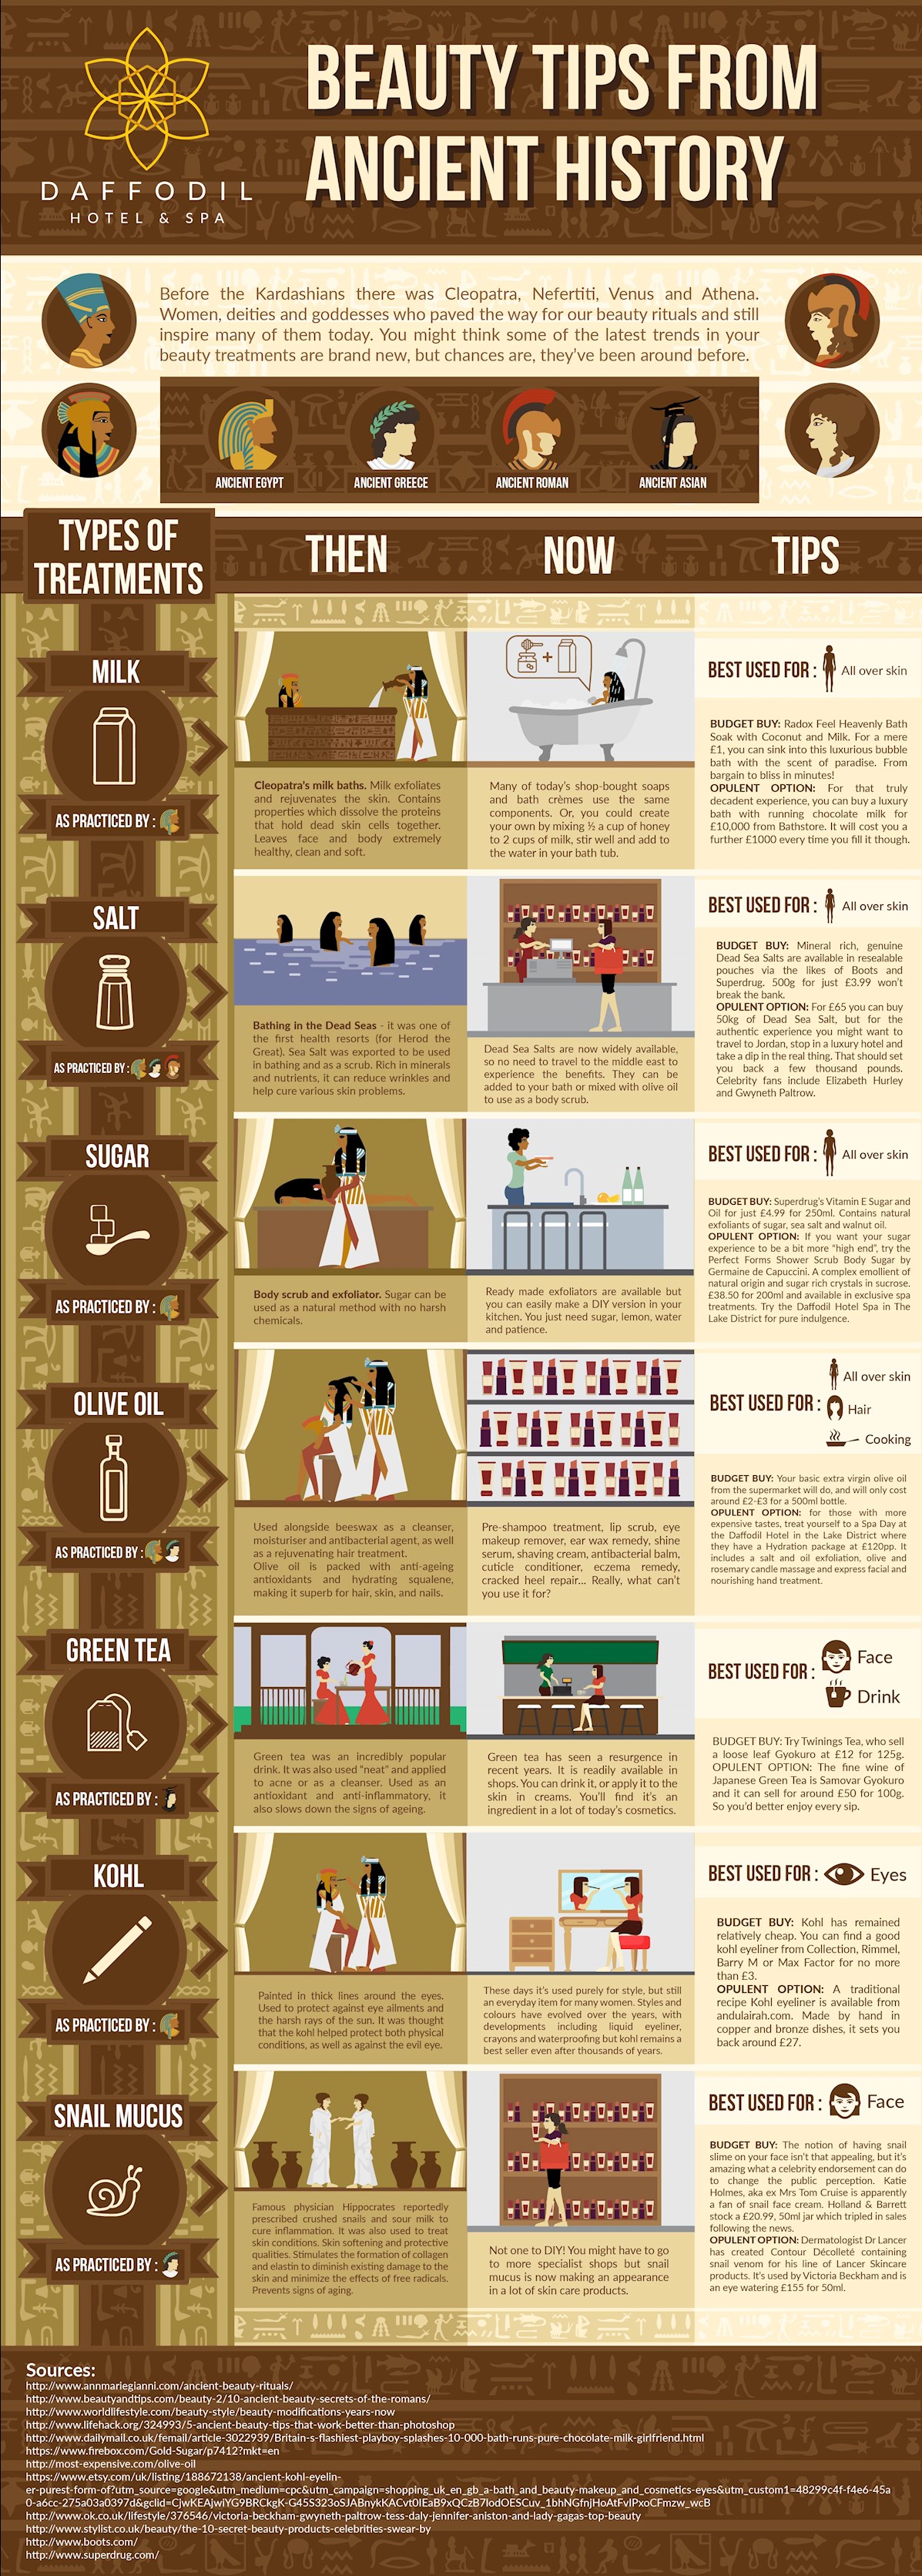 Beauty tips from ancient history [Infographic]